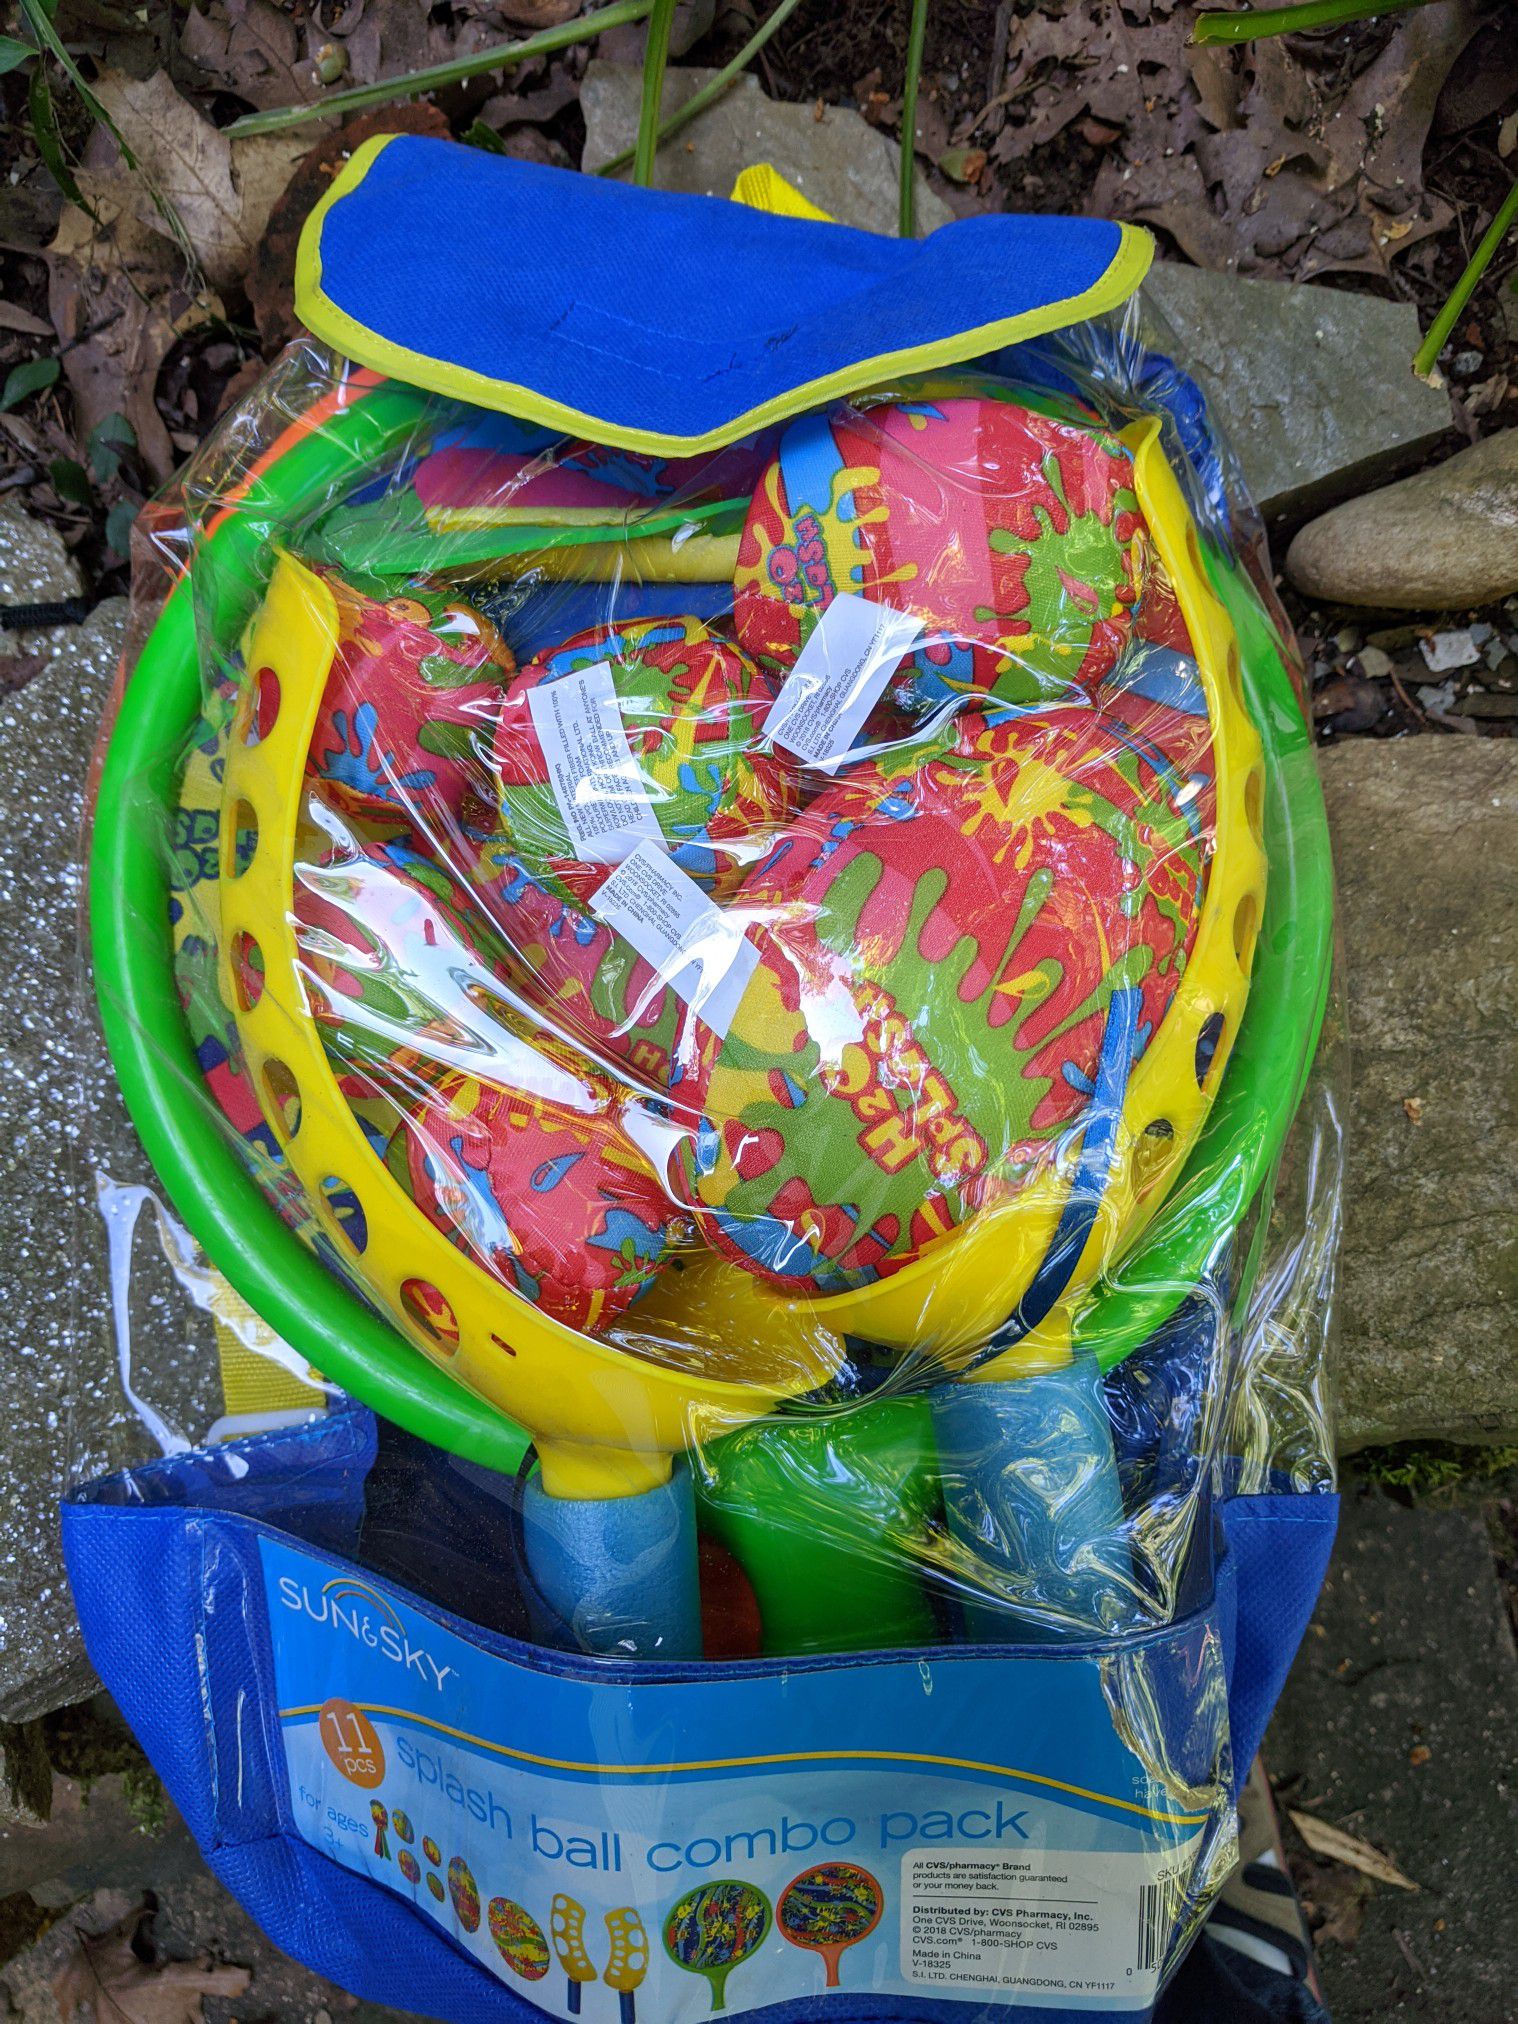 Free Water toys